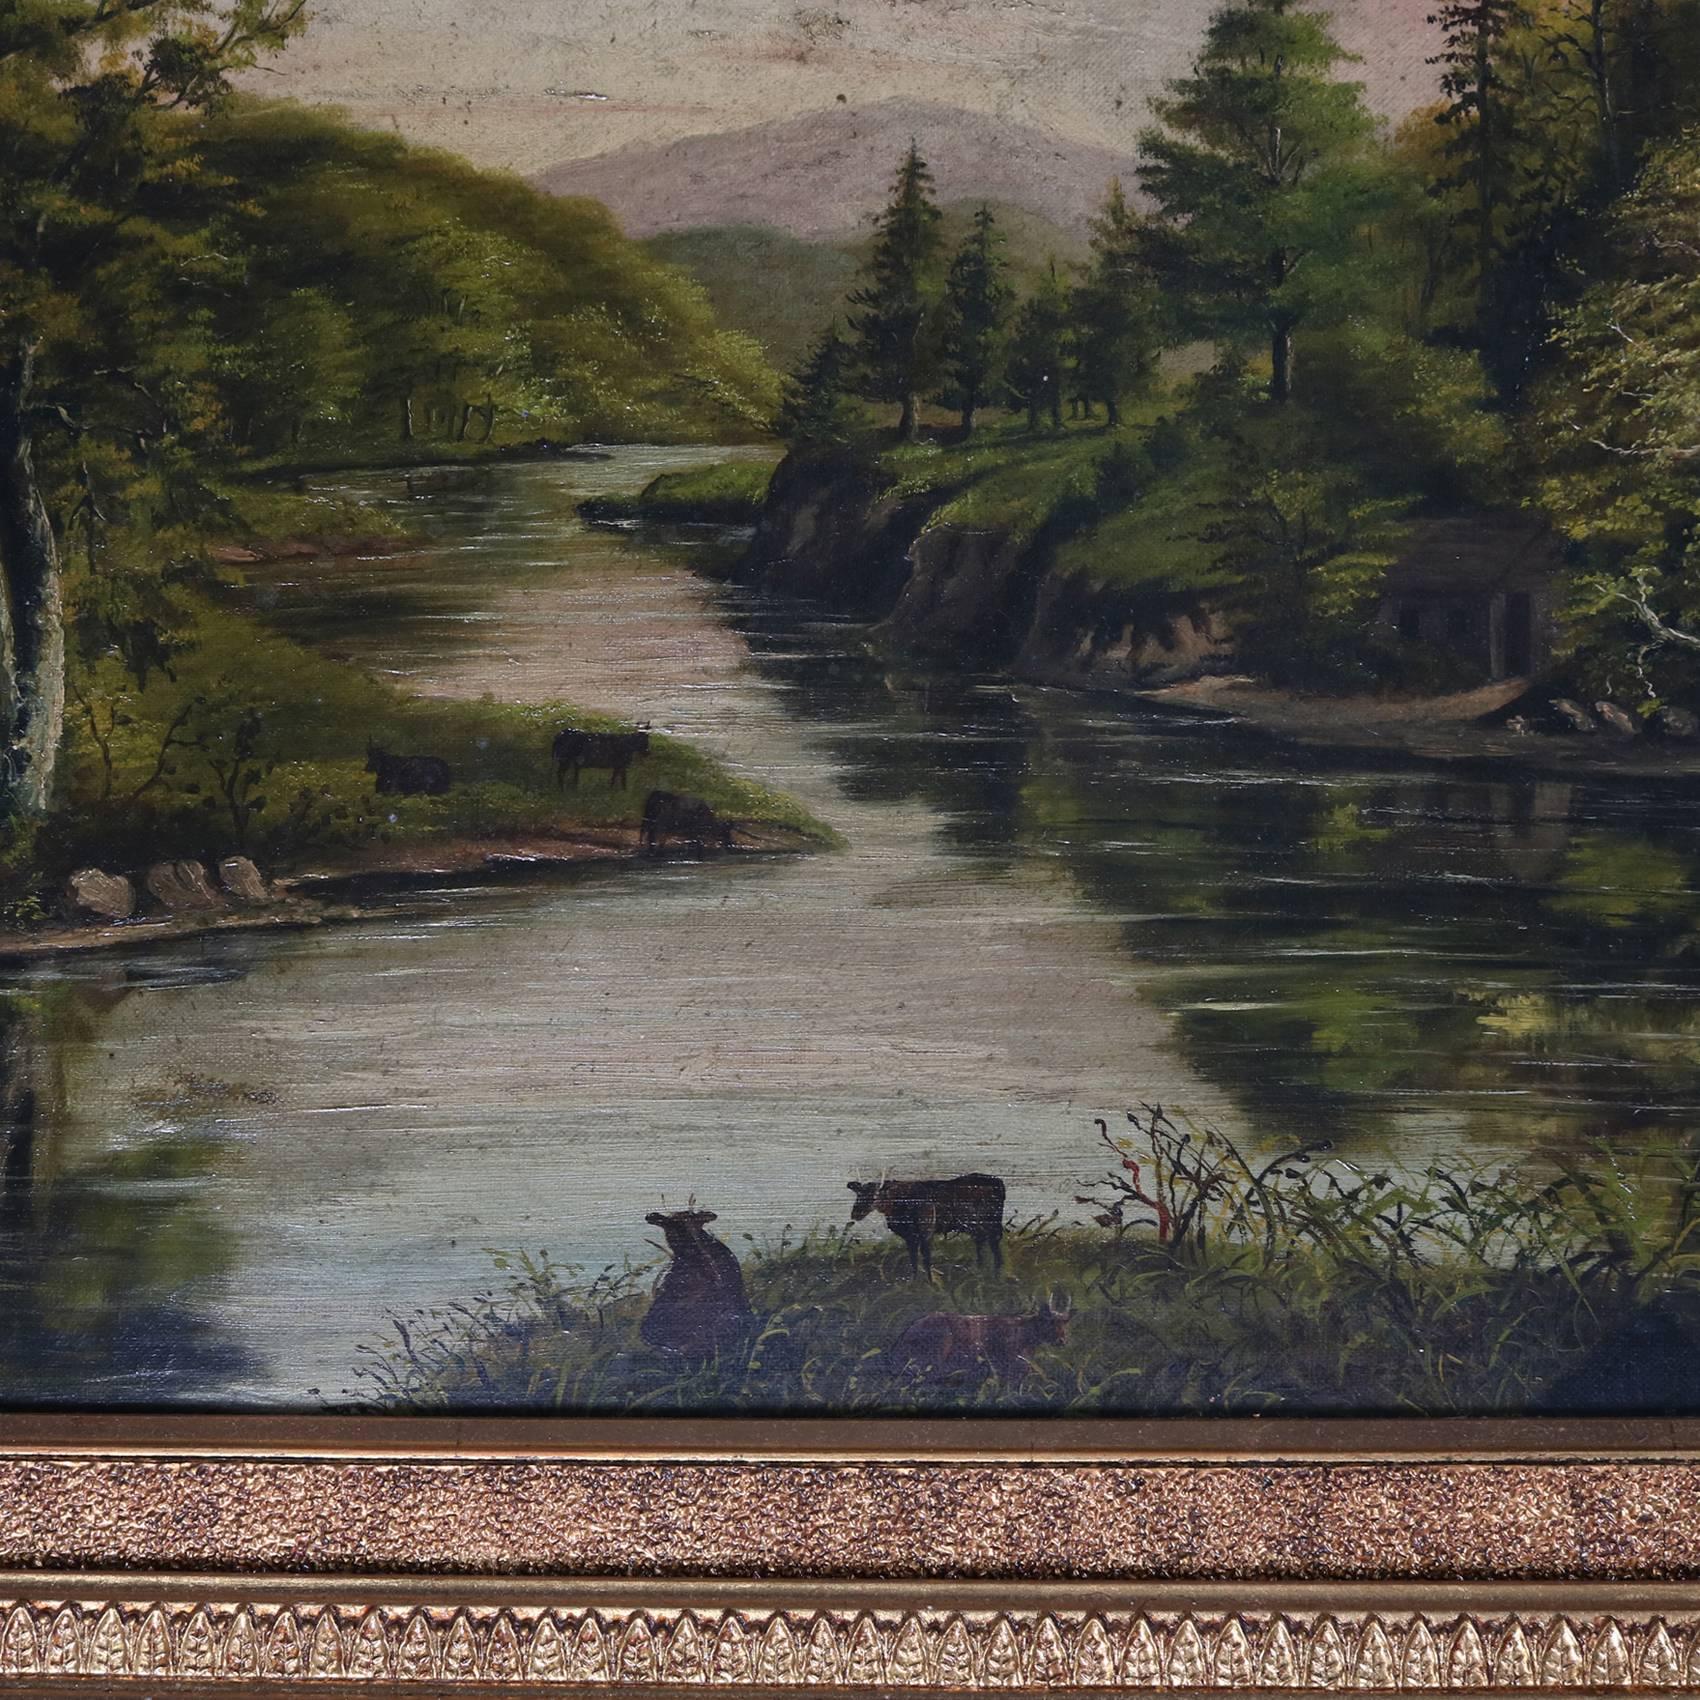 Antique Hudson River School oil-on-canvas landscape painting depicts river scene with cattle, seated in giltwood surround, signed bottom right Lydia Murray 1884, 19th ce

Measures - fr: 28" h x 36.5" w x 2.5" d, los: 18.5" h x